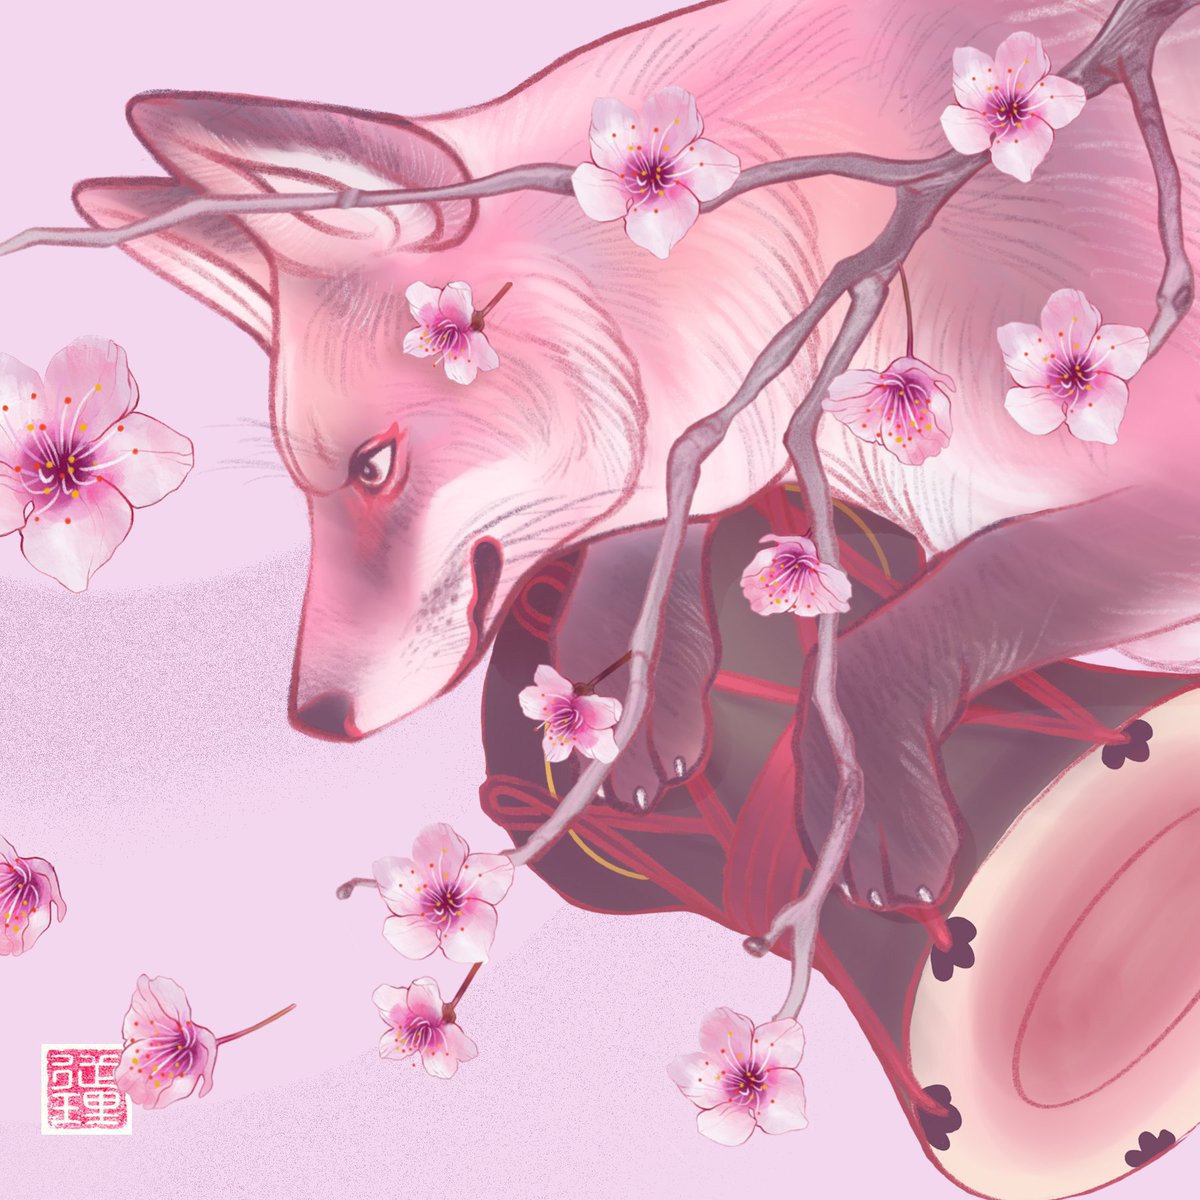 NEW PIECE 🌸 “Together Forever Under A Thousand Cherry Trees” 🌸
.
Do you know why the fox Tadanobu so badly wants this drum? 🥲
.
#yoshitsunesenbonzakura #japanesefolklore #fox #japanesefolktales #cherrytrees #cherryblossom #桜 #義経千本桜 #忠信 #狐 #御伽話 #歌舞伎の絵 #宙乗り